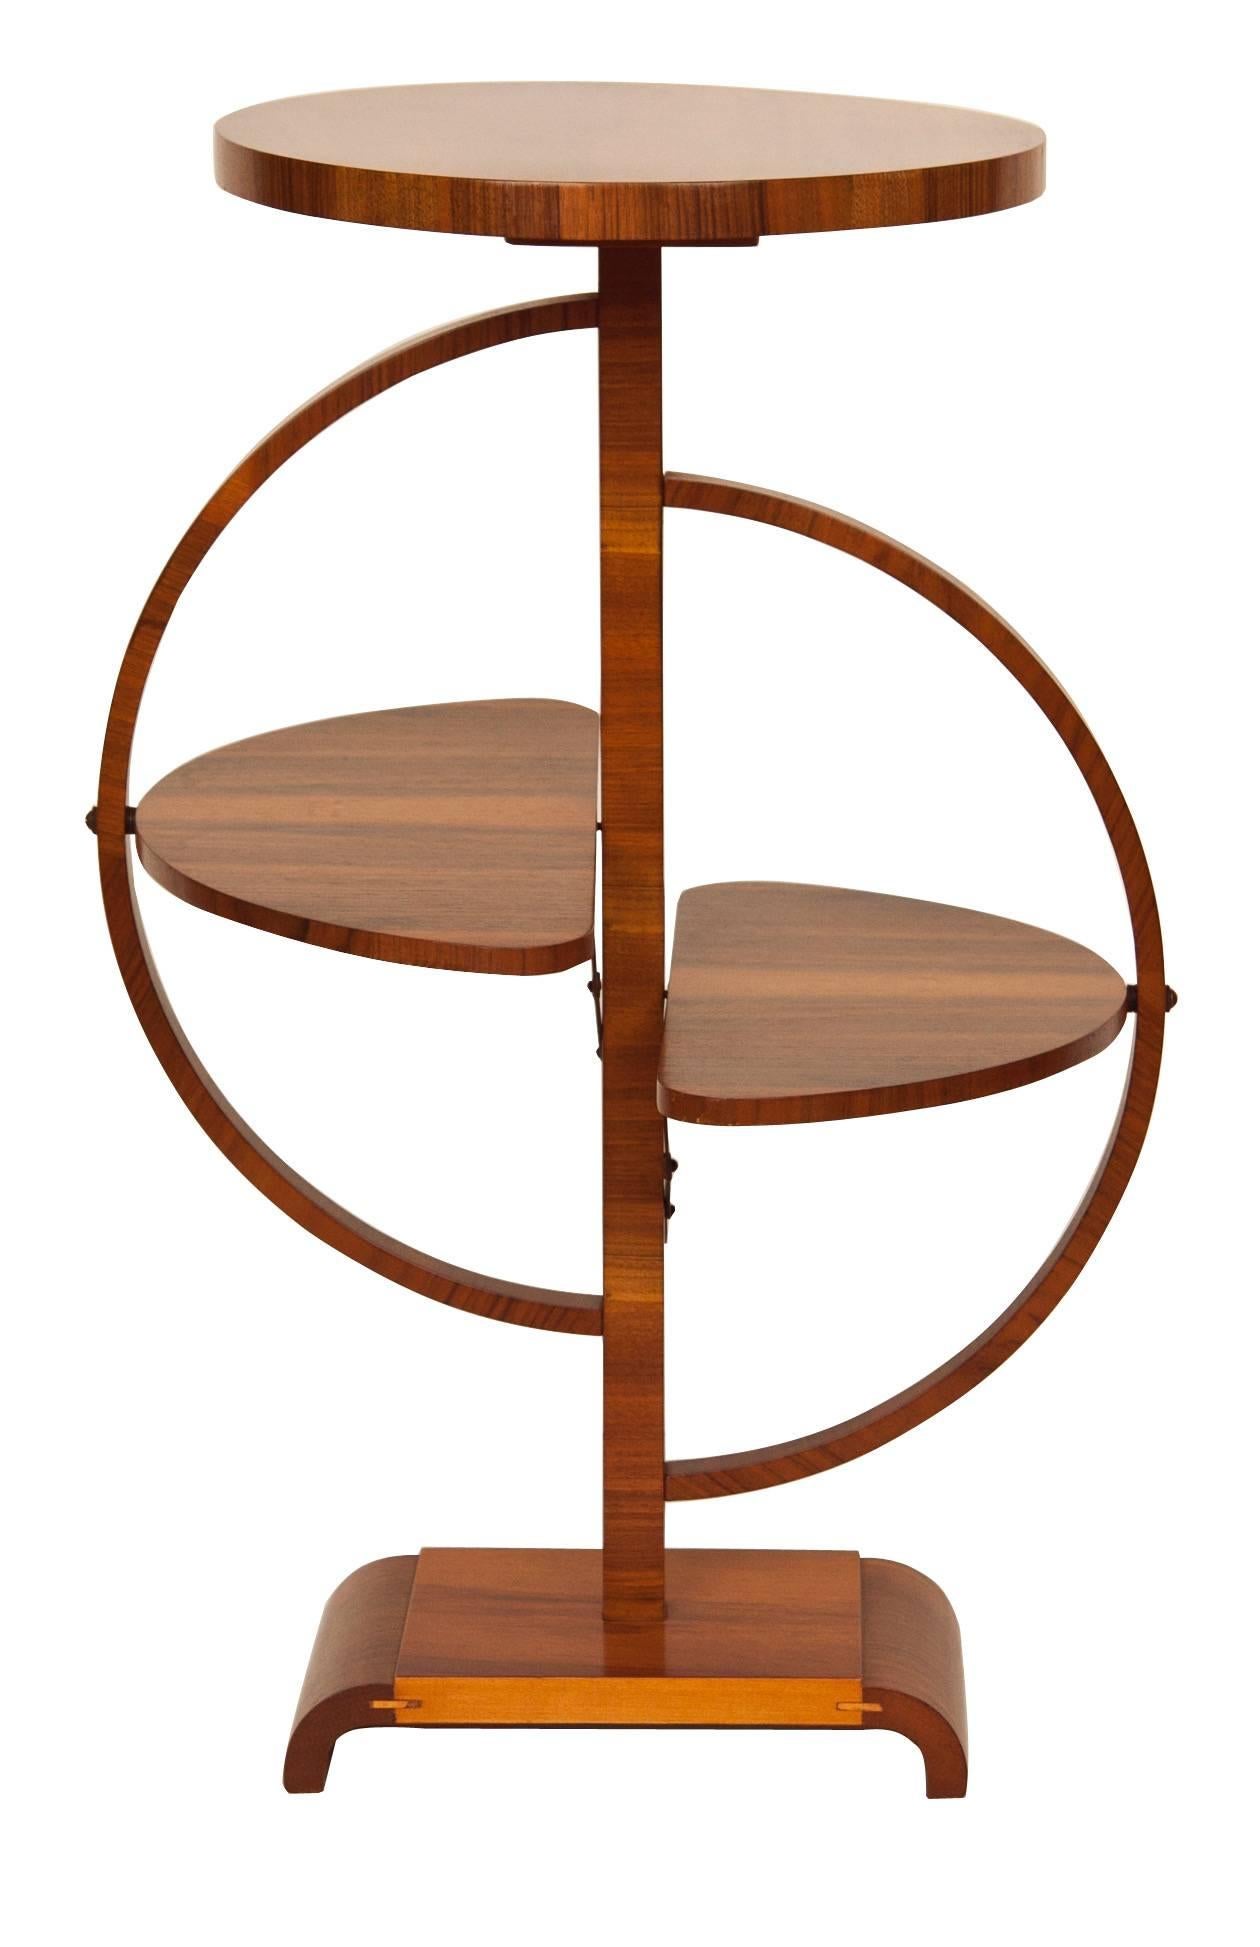 Art Deco table.
A rare Art Deco table with fold out under shelves.
Art Deco Walnut circular table with two fold outside shelves.
A beautifully crafted table in stunning walnut veneer.
76 cm H 37 cm diameter at the top 44 cm diameter with side